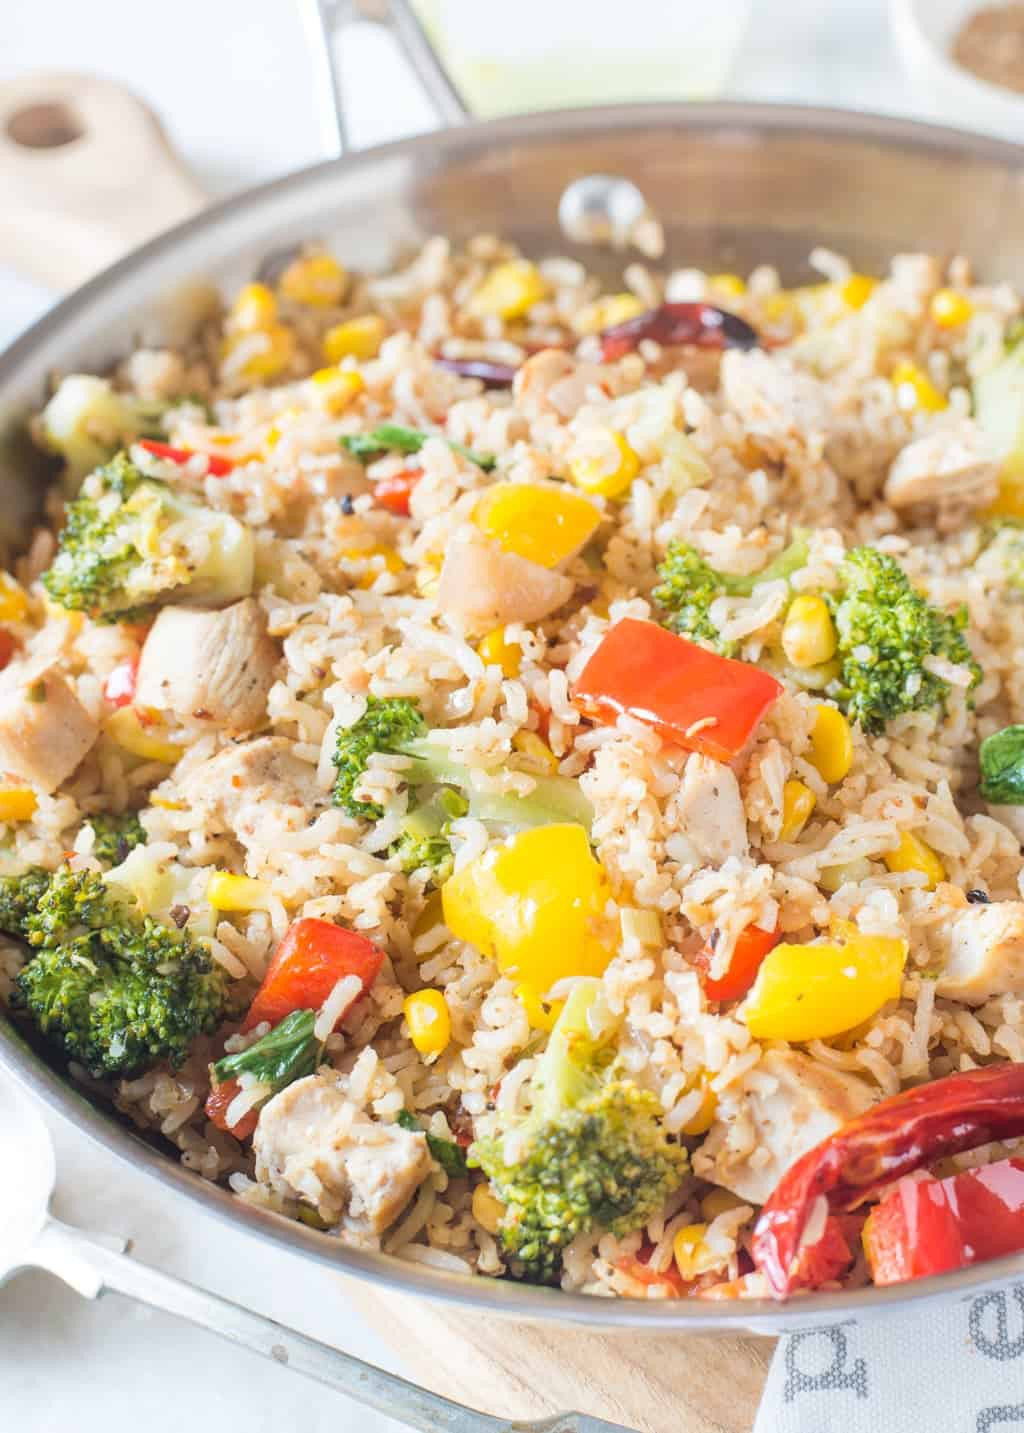 Don’t Miss Our 15 Most Shared Chicken and Brown Rice Recipes